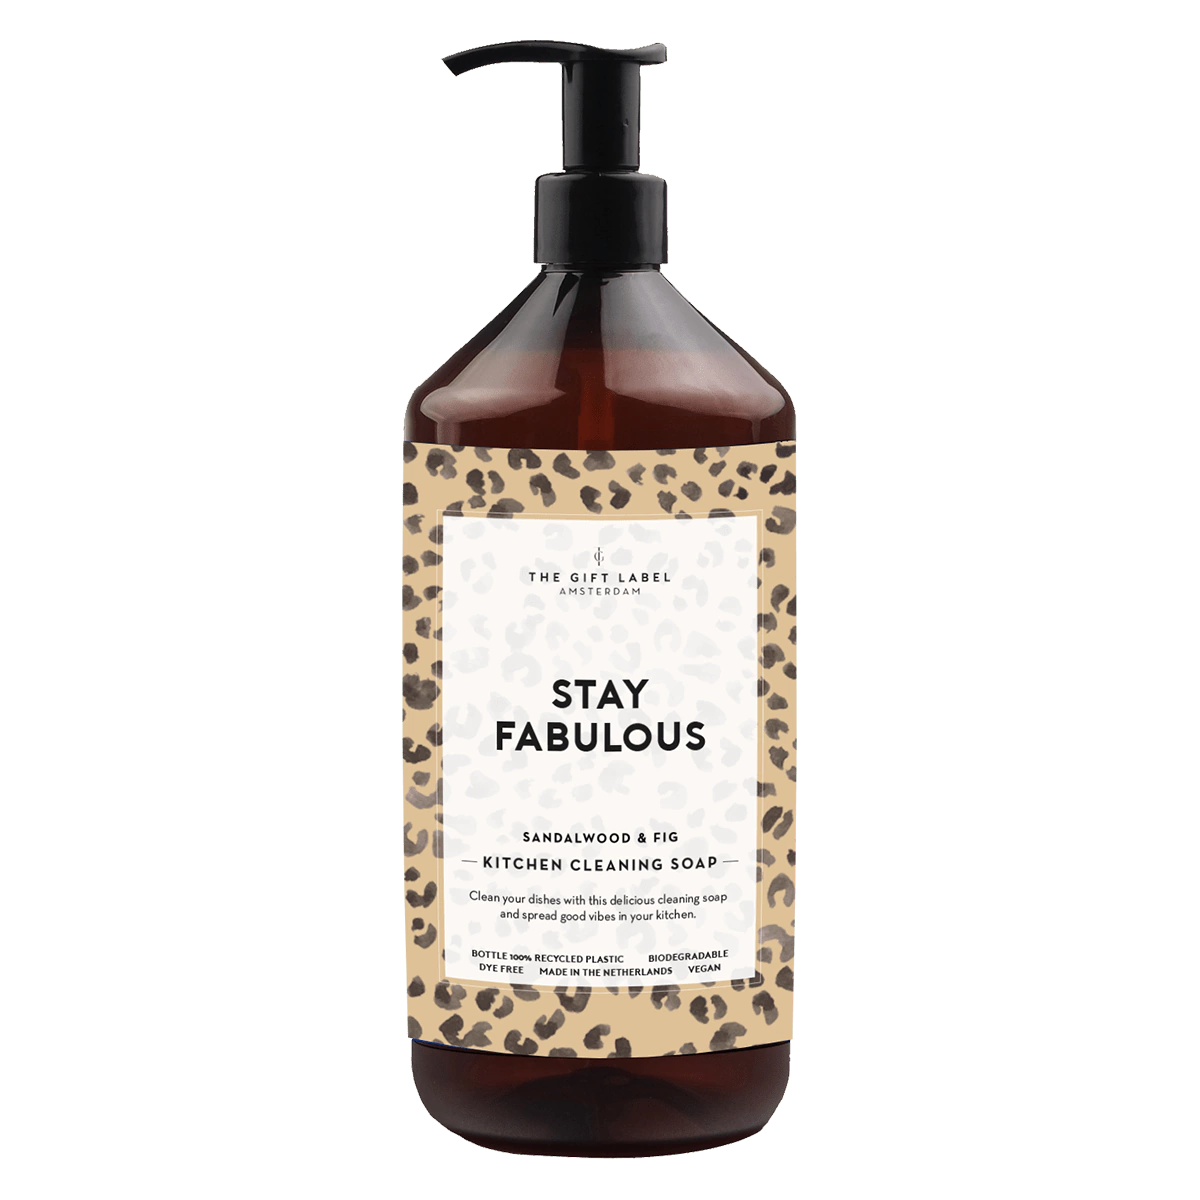 KITCHEN CLEANING SOAP - STAY FABULOUS